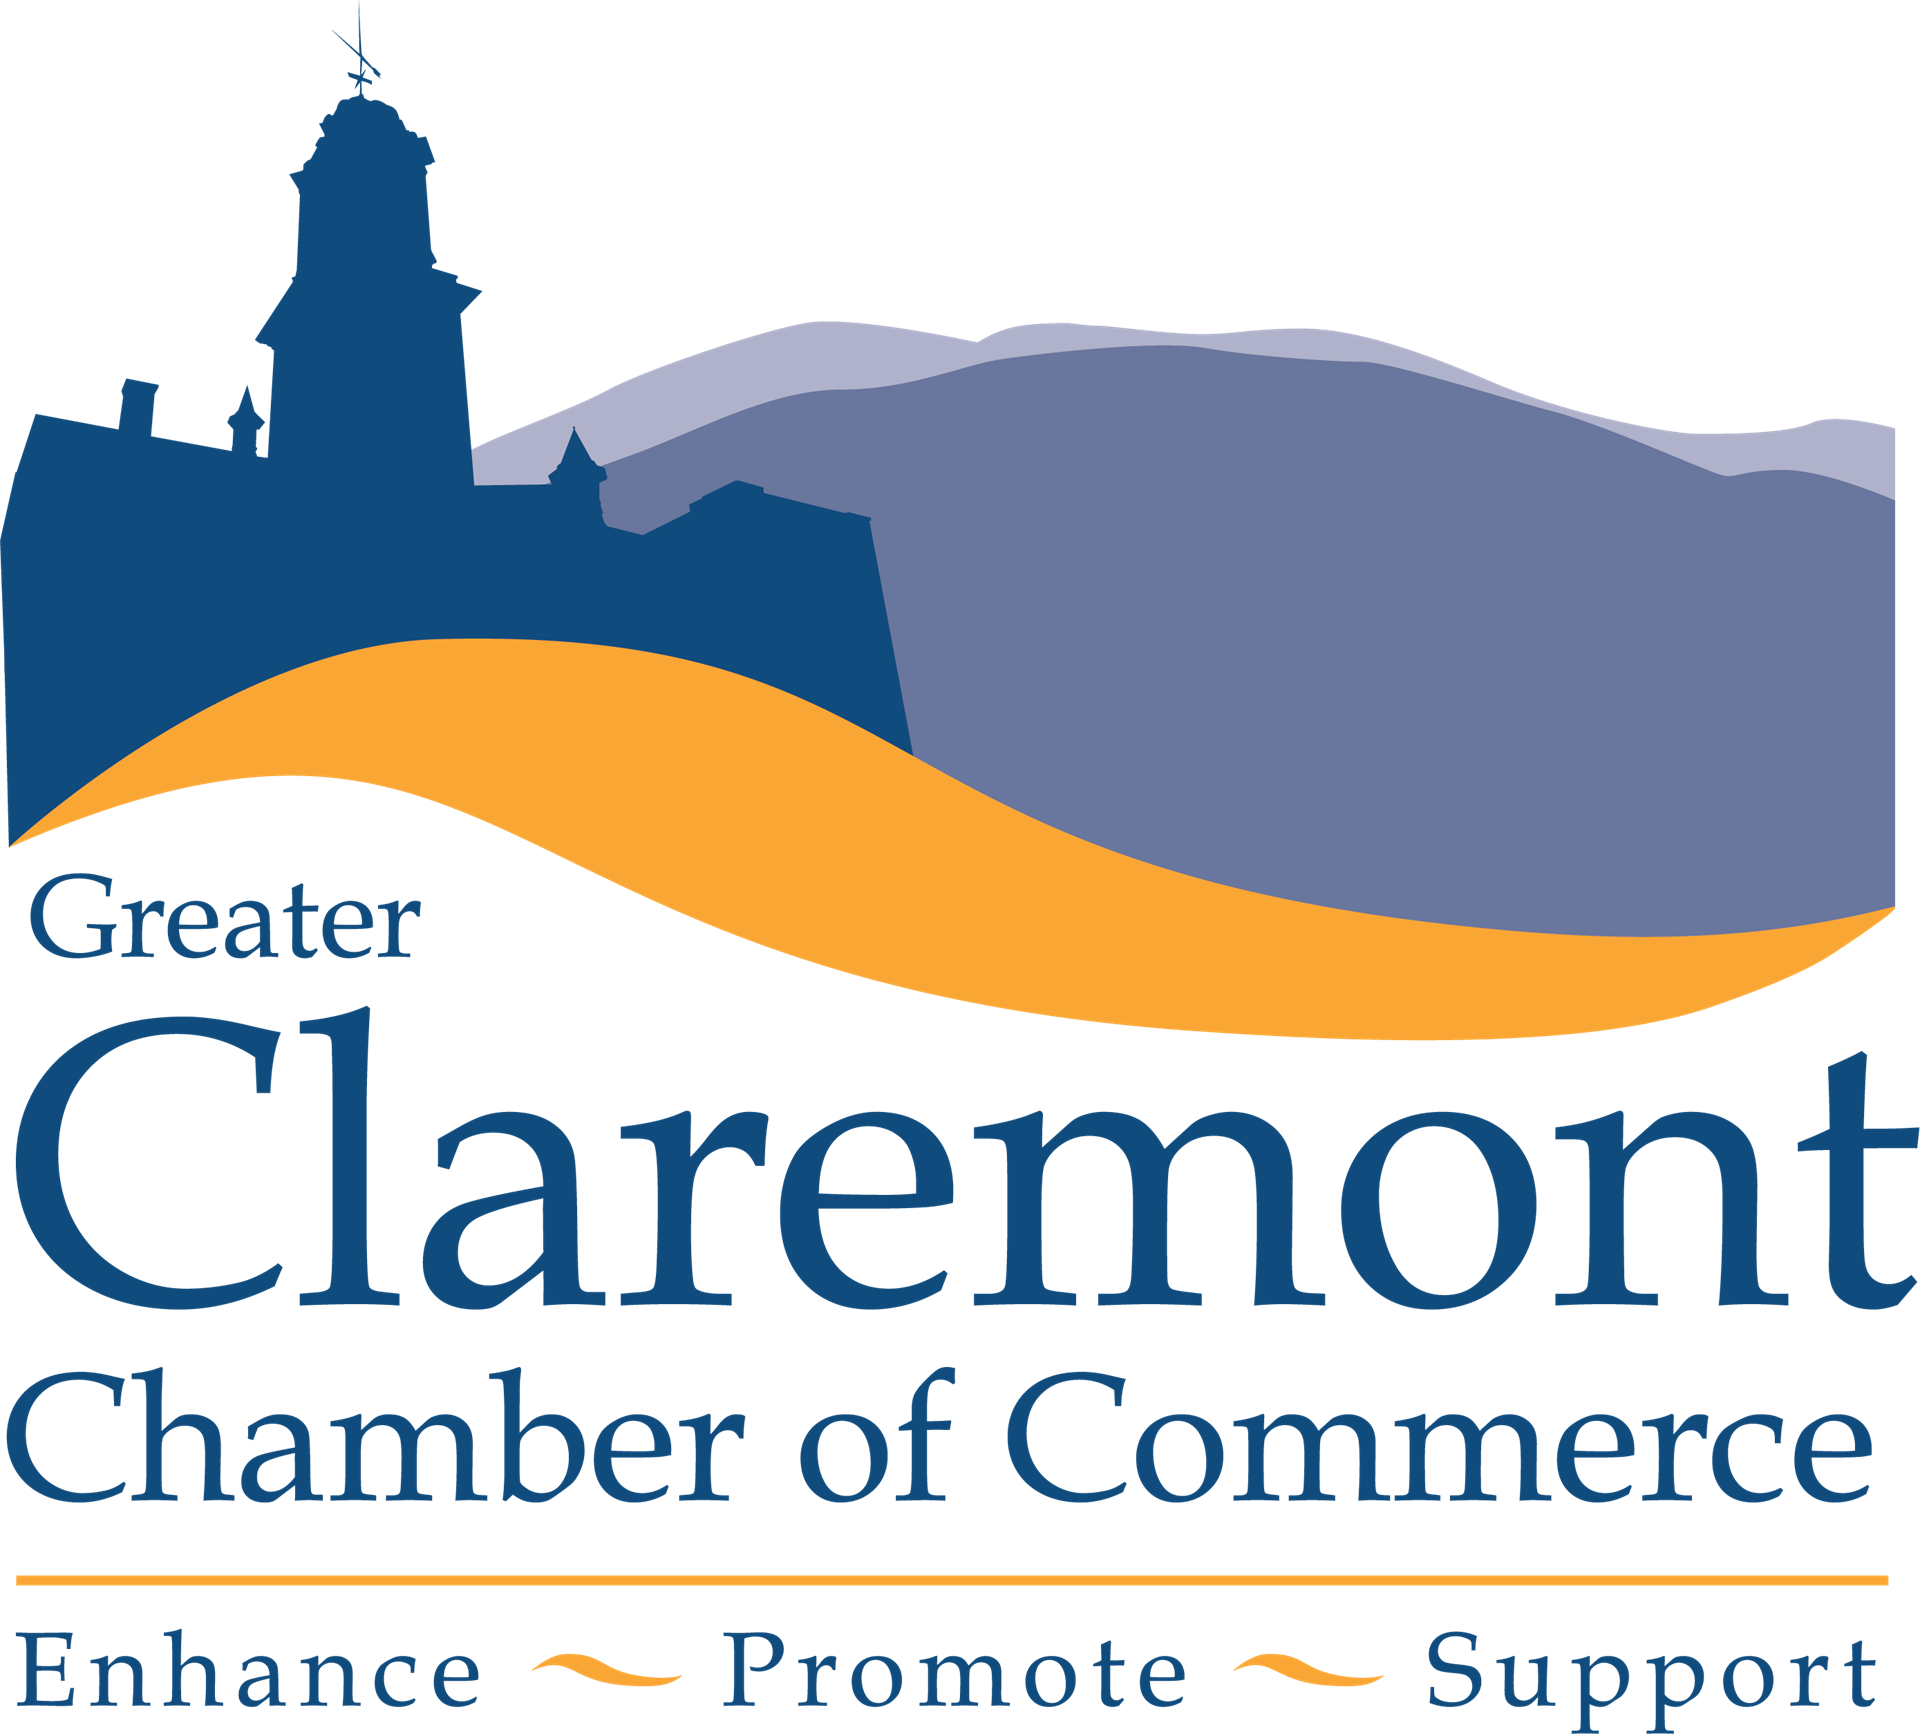 Greater Claremont Chamber of Commerce logo